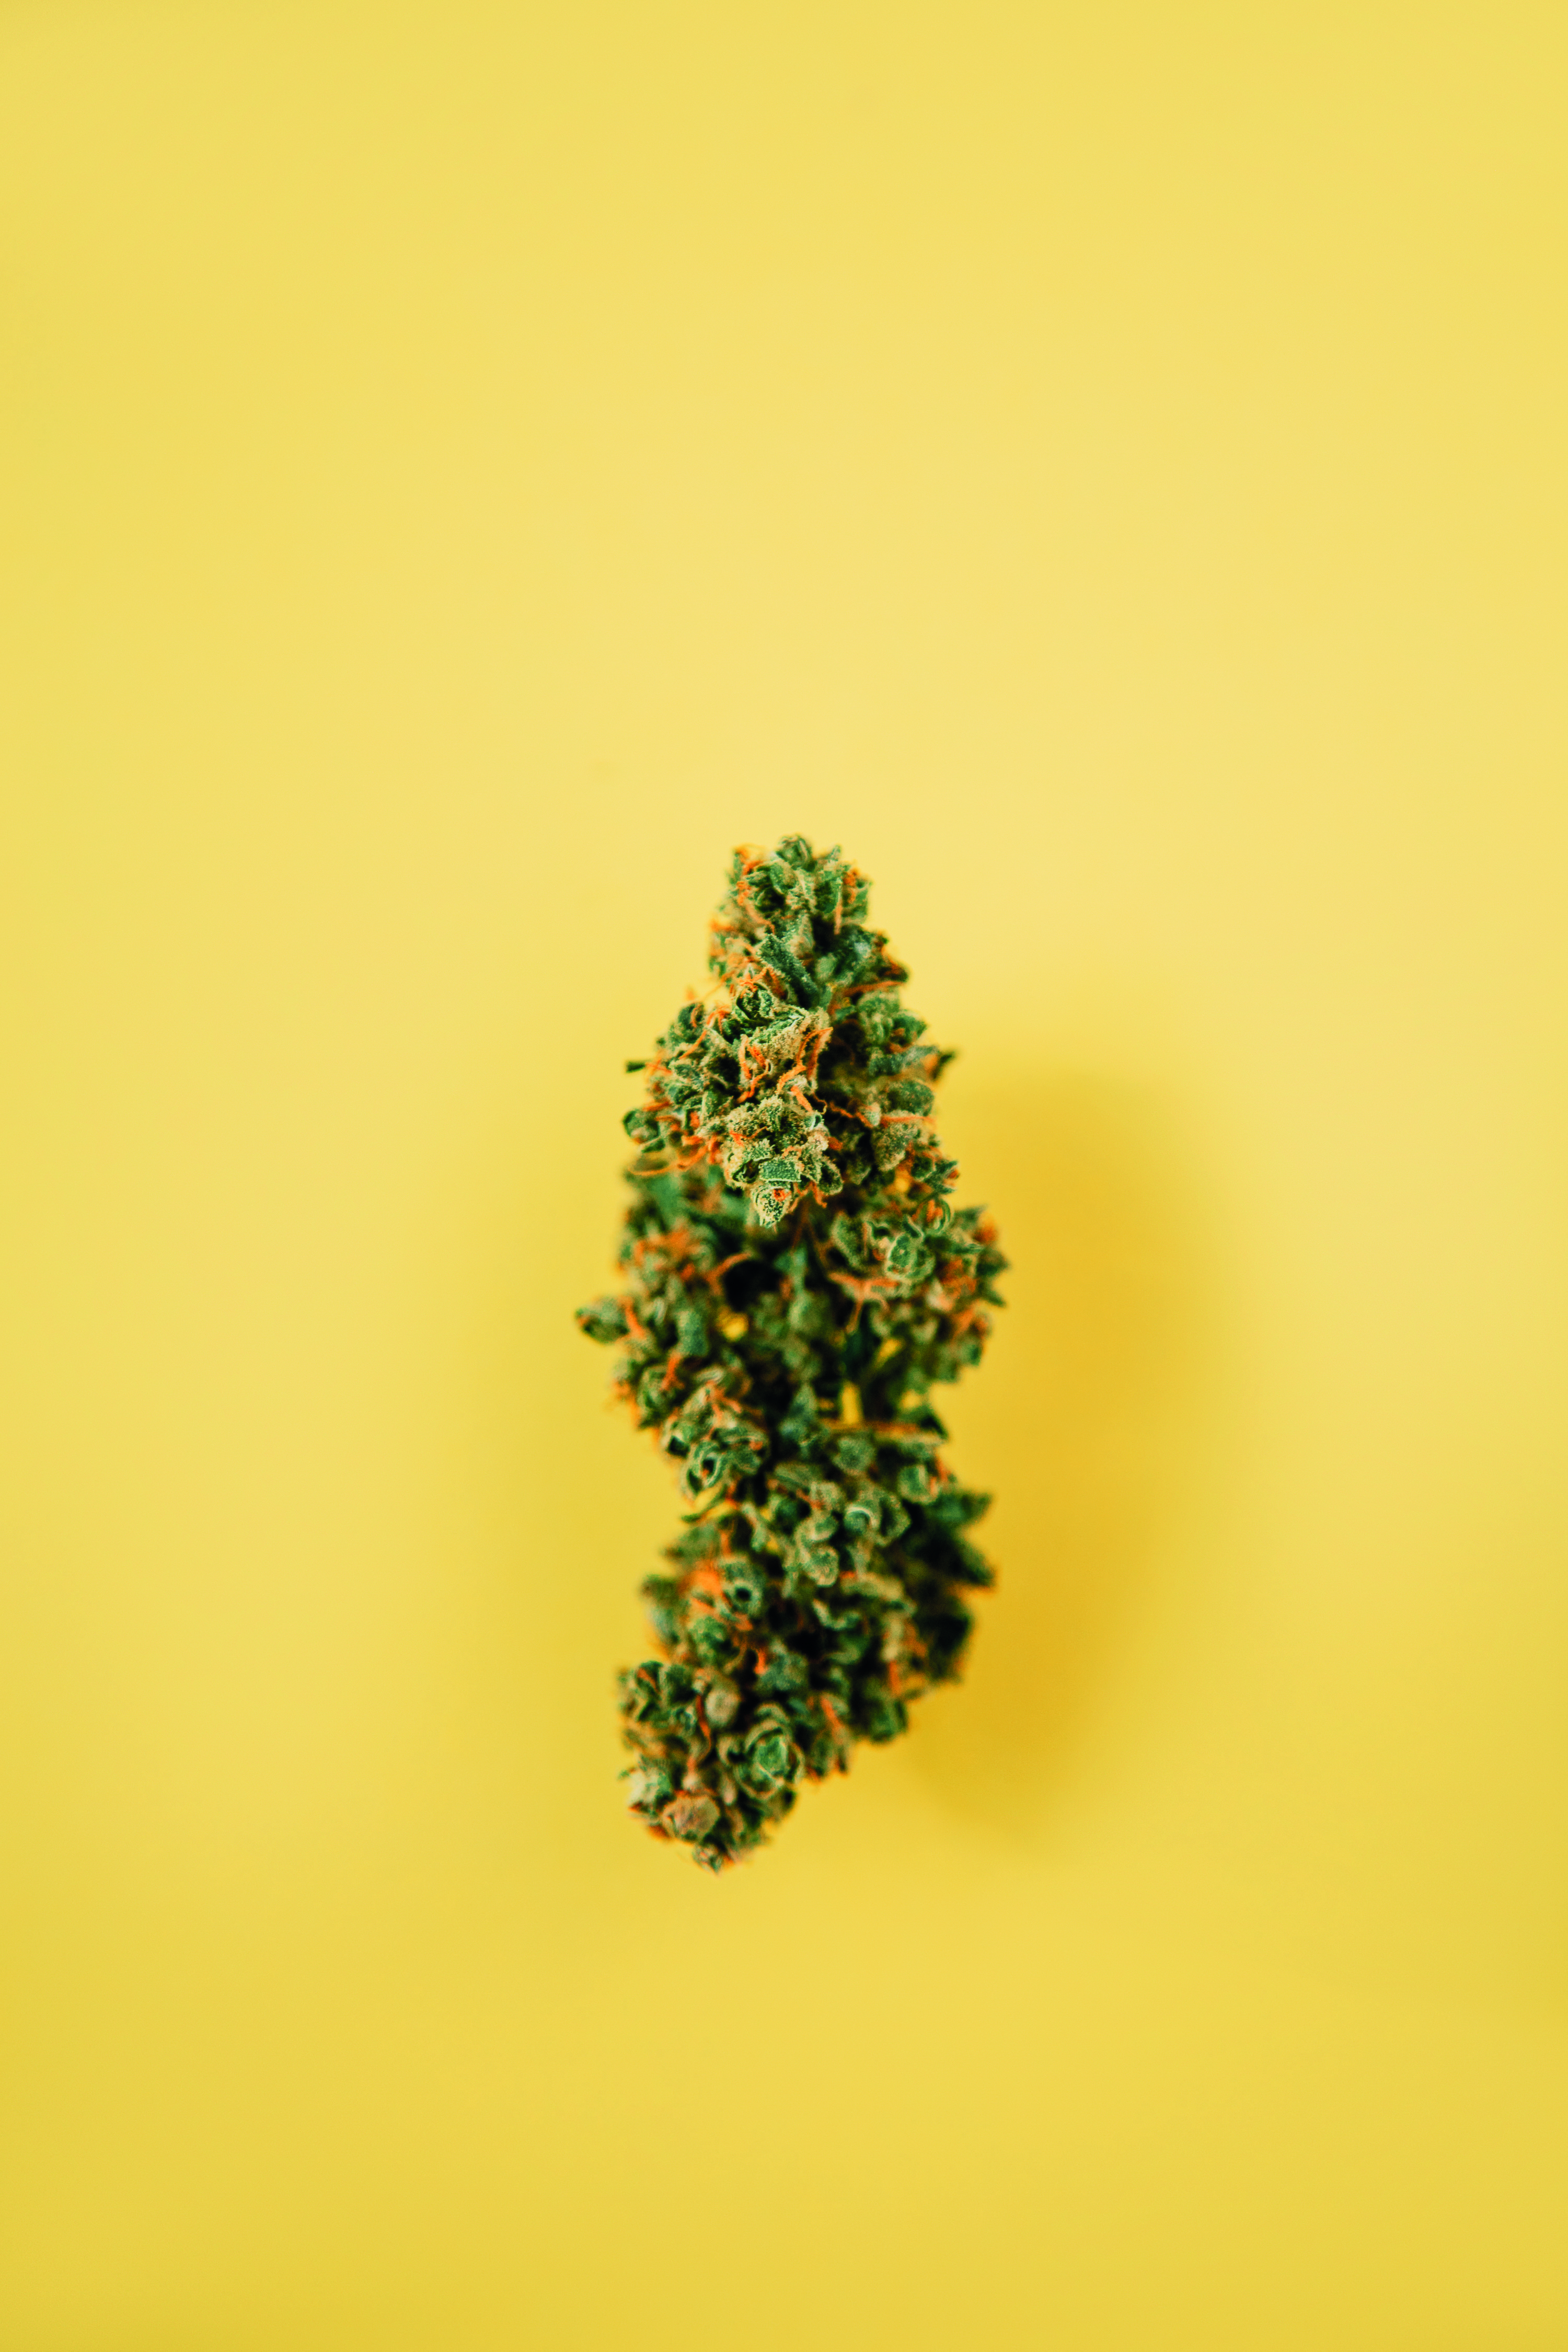 An image of cannabis over a yellow background